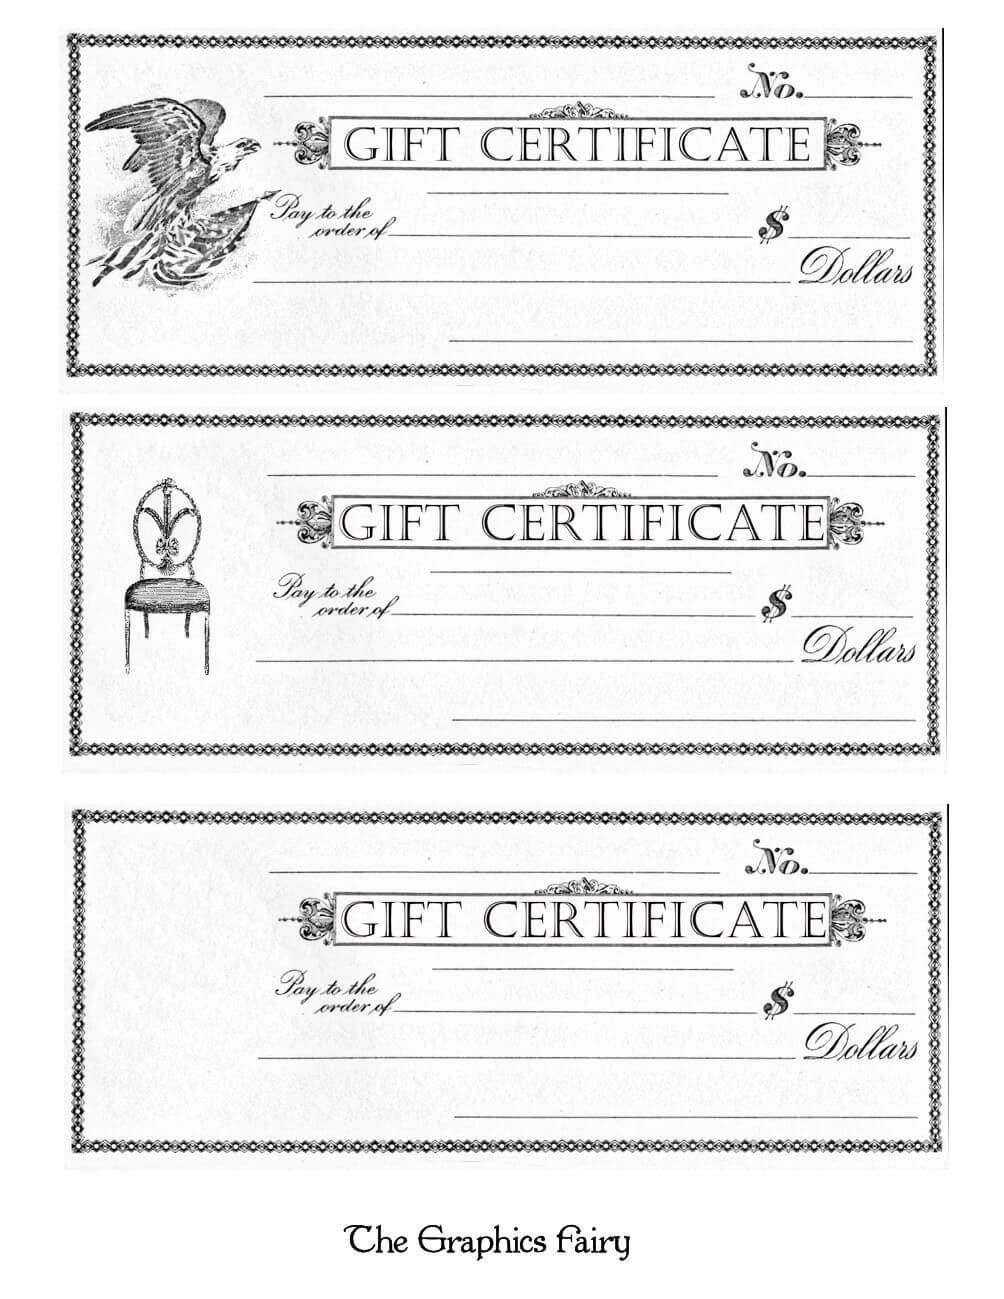 printing-gift-certificates-free-tomope-zaribanks-co-with-printable